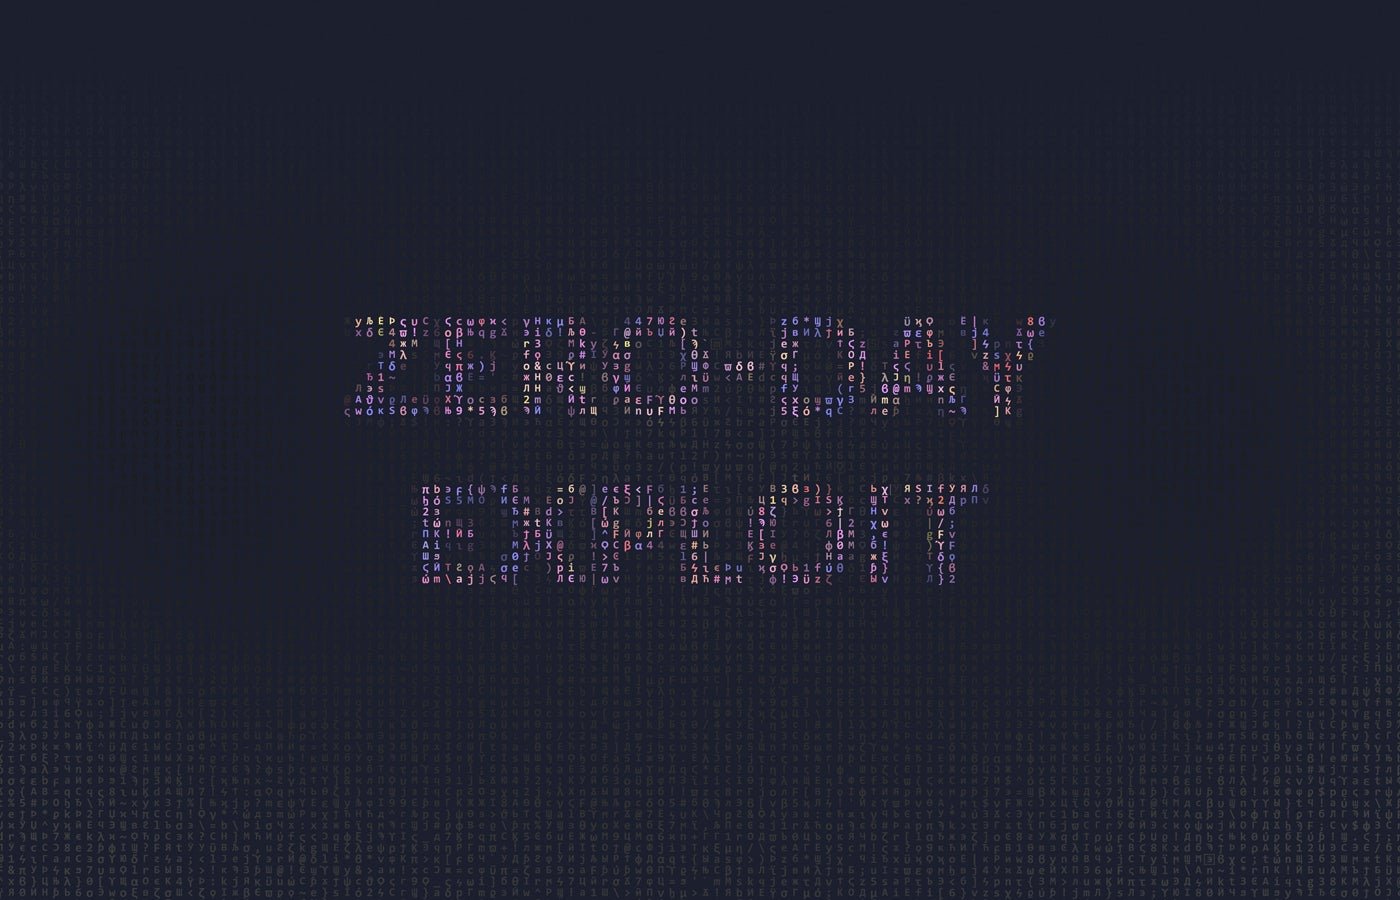 Zero-Day Exploits Cheat Sheet: Definition, Examples & How It Works